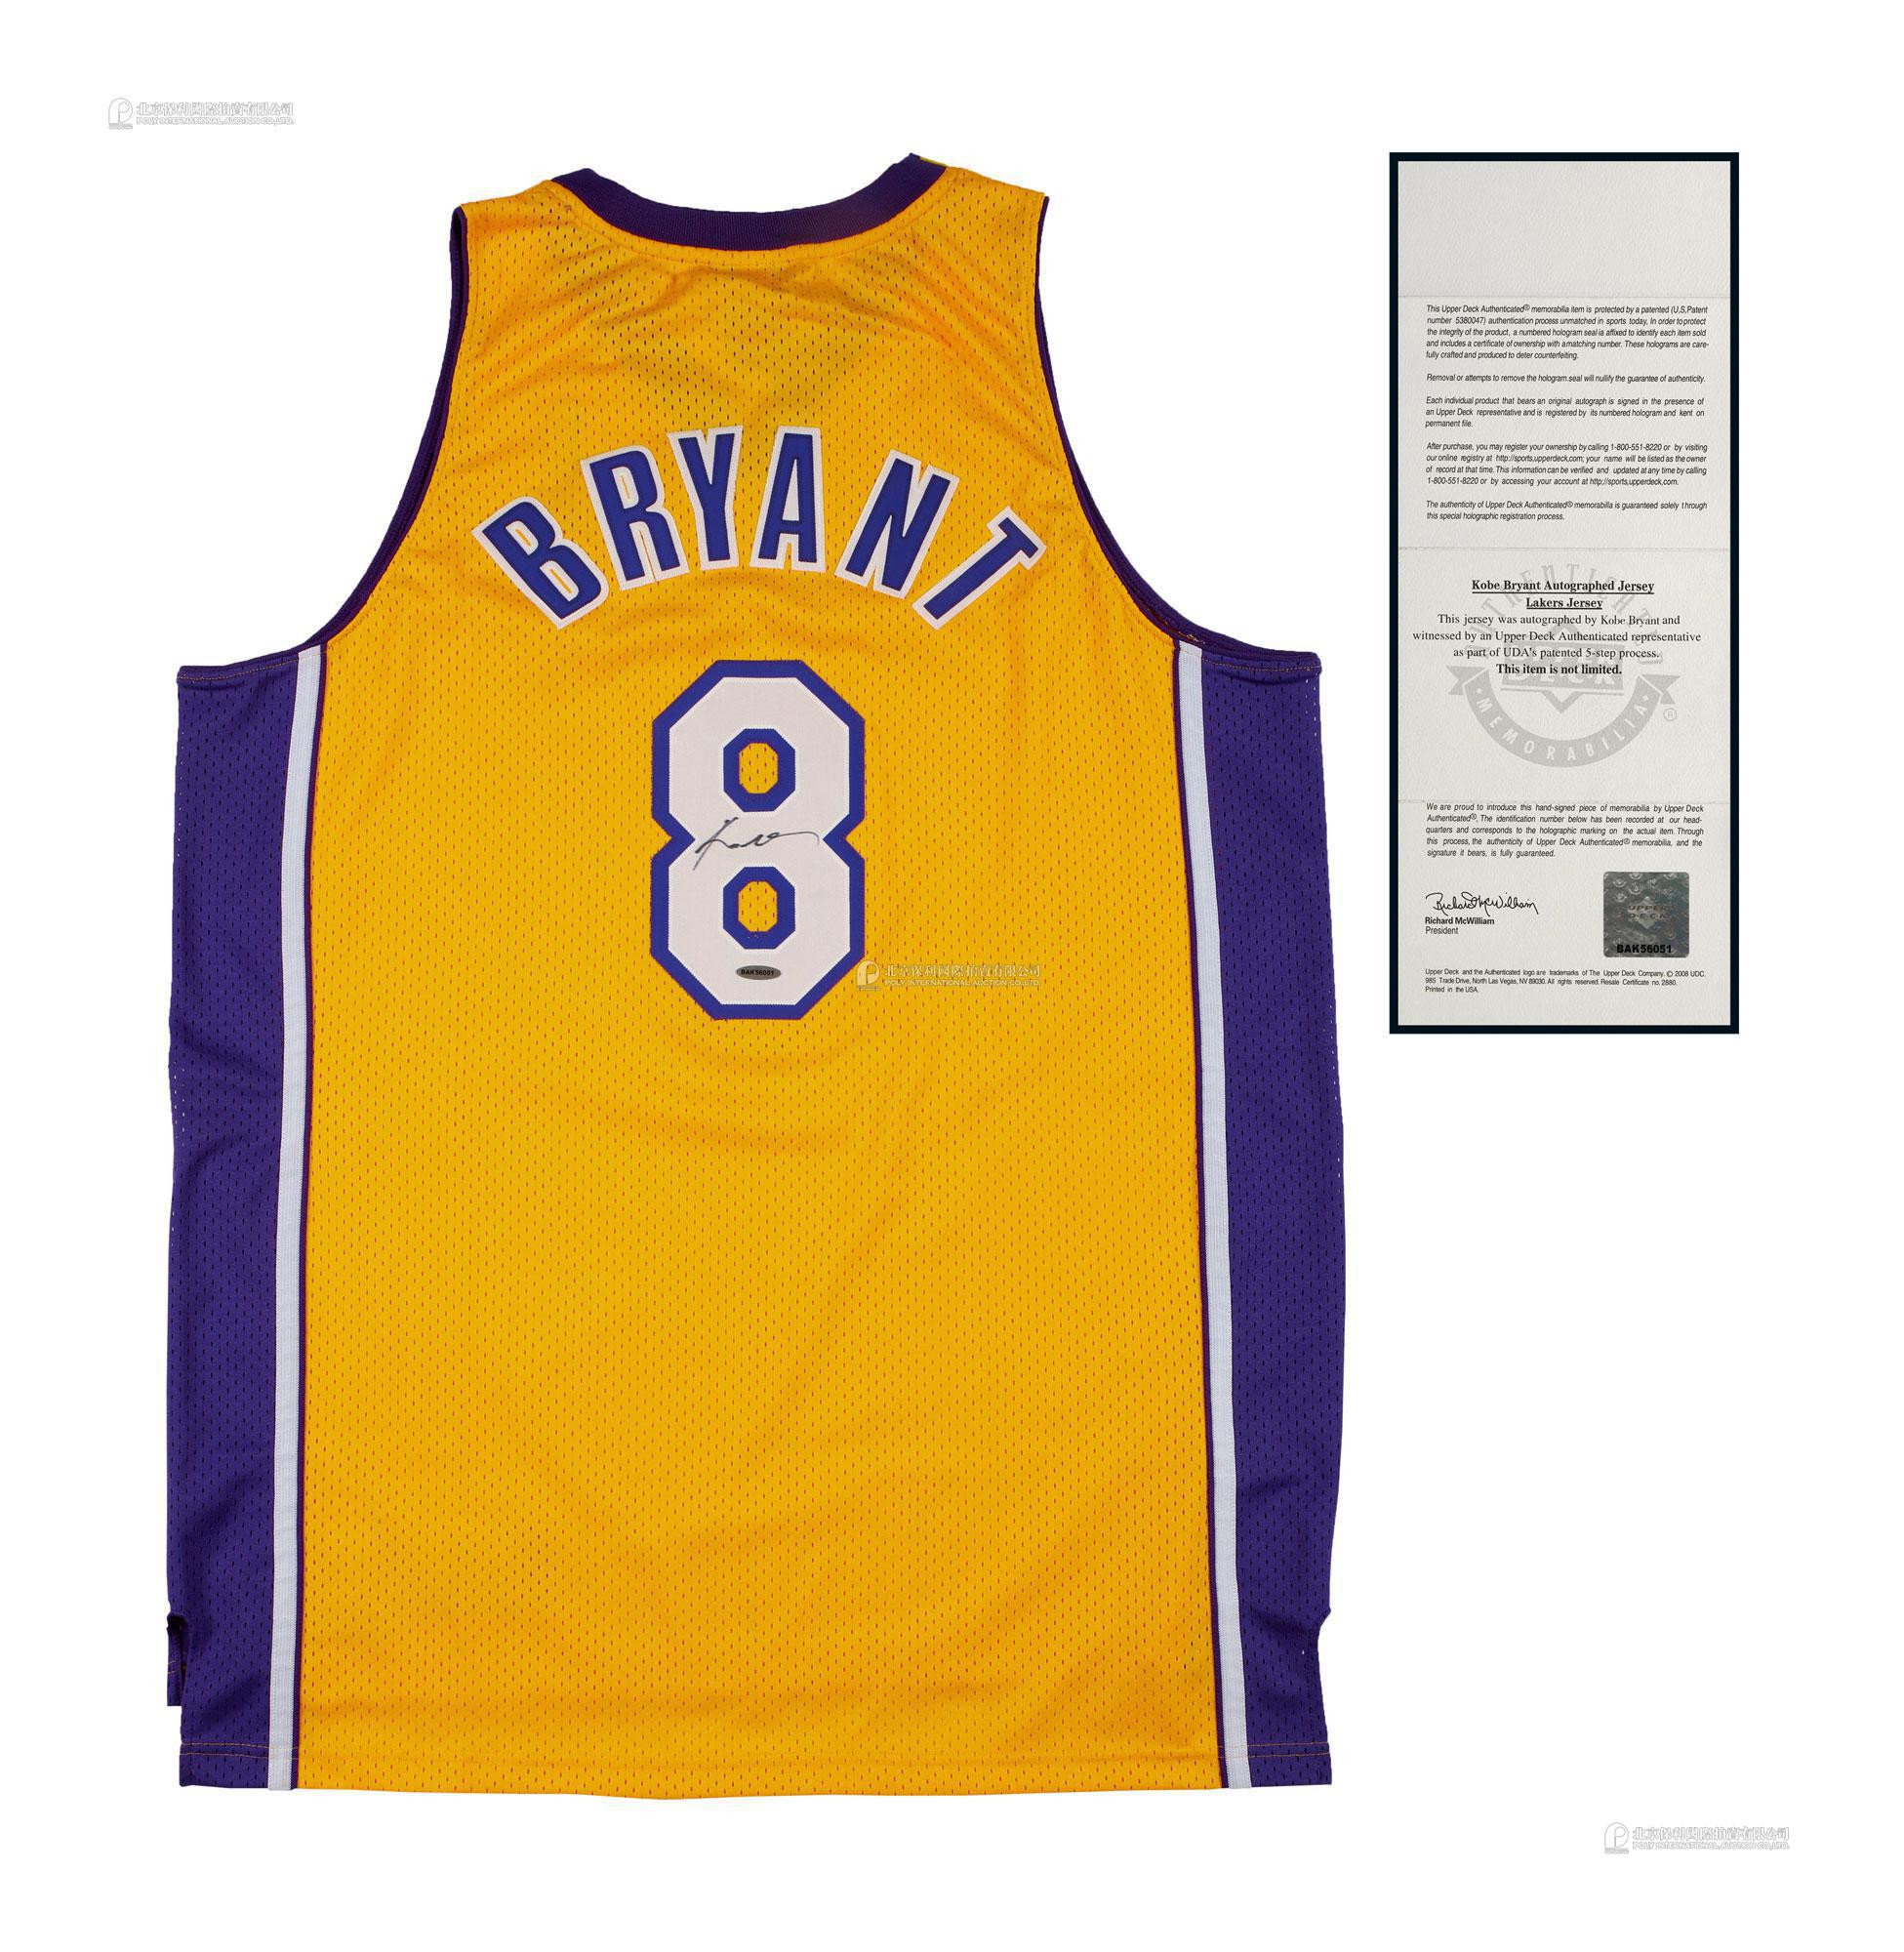 The autographed Lakers jersey of Kobe Bryant, the”Black Mamba”, with certificate